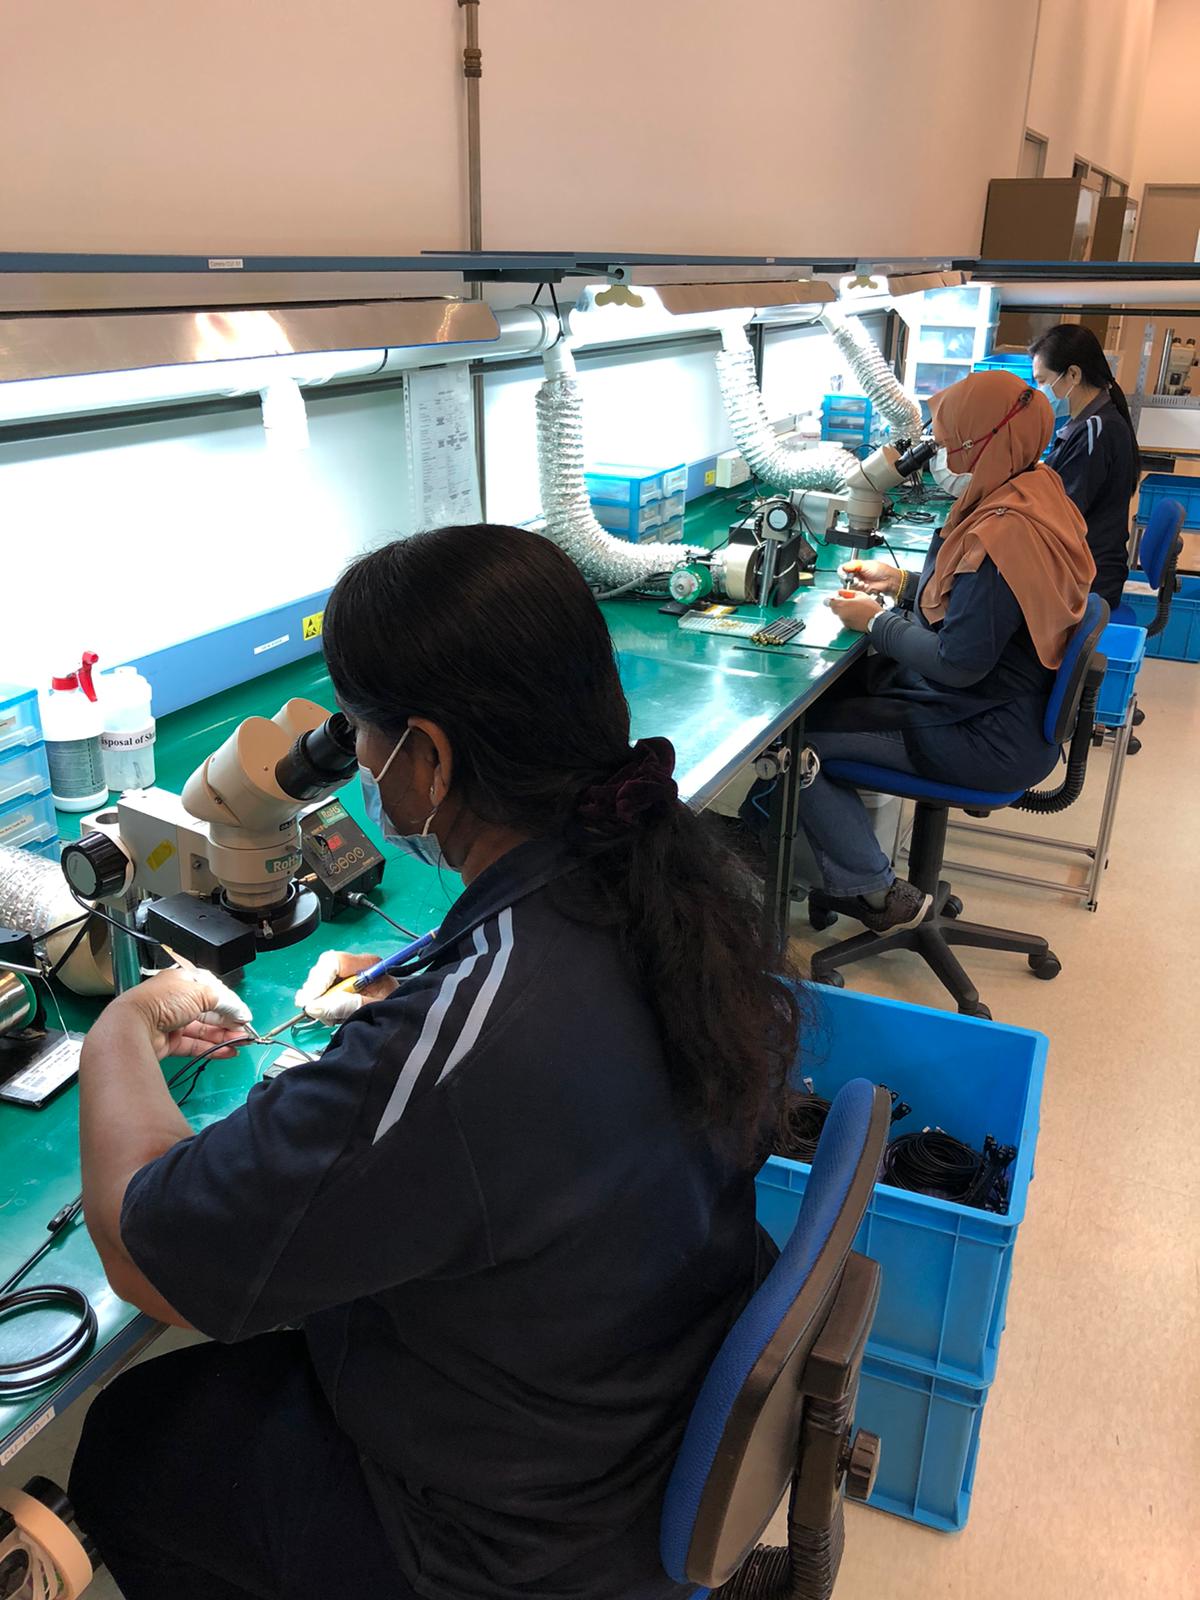 A view of the manufacturing process at Intricon, a global leader in micromedical technology and joint development manufacturer